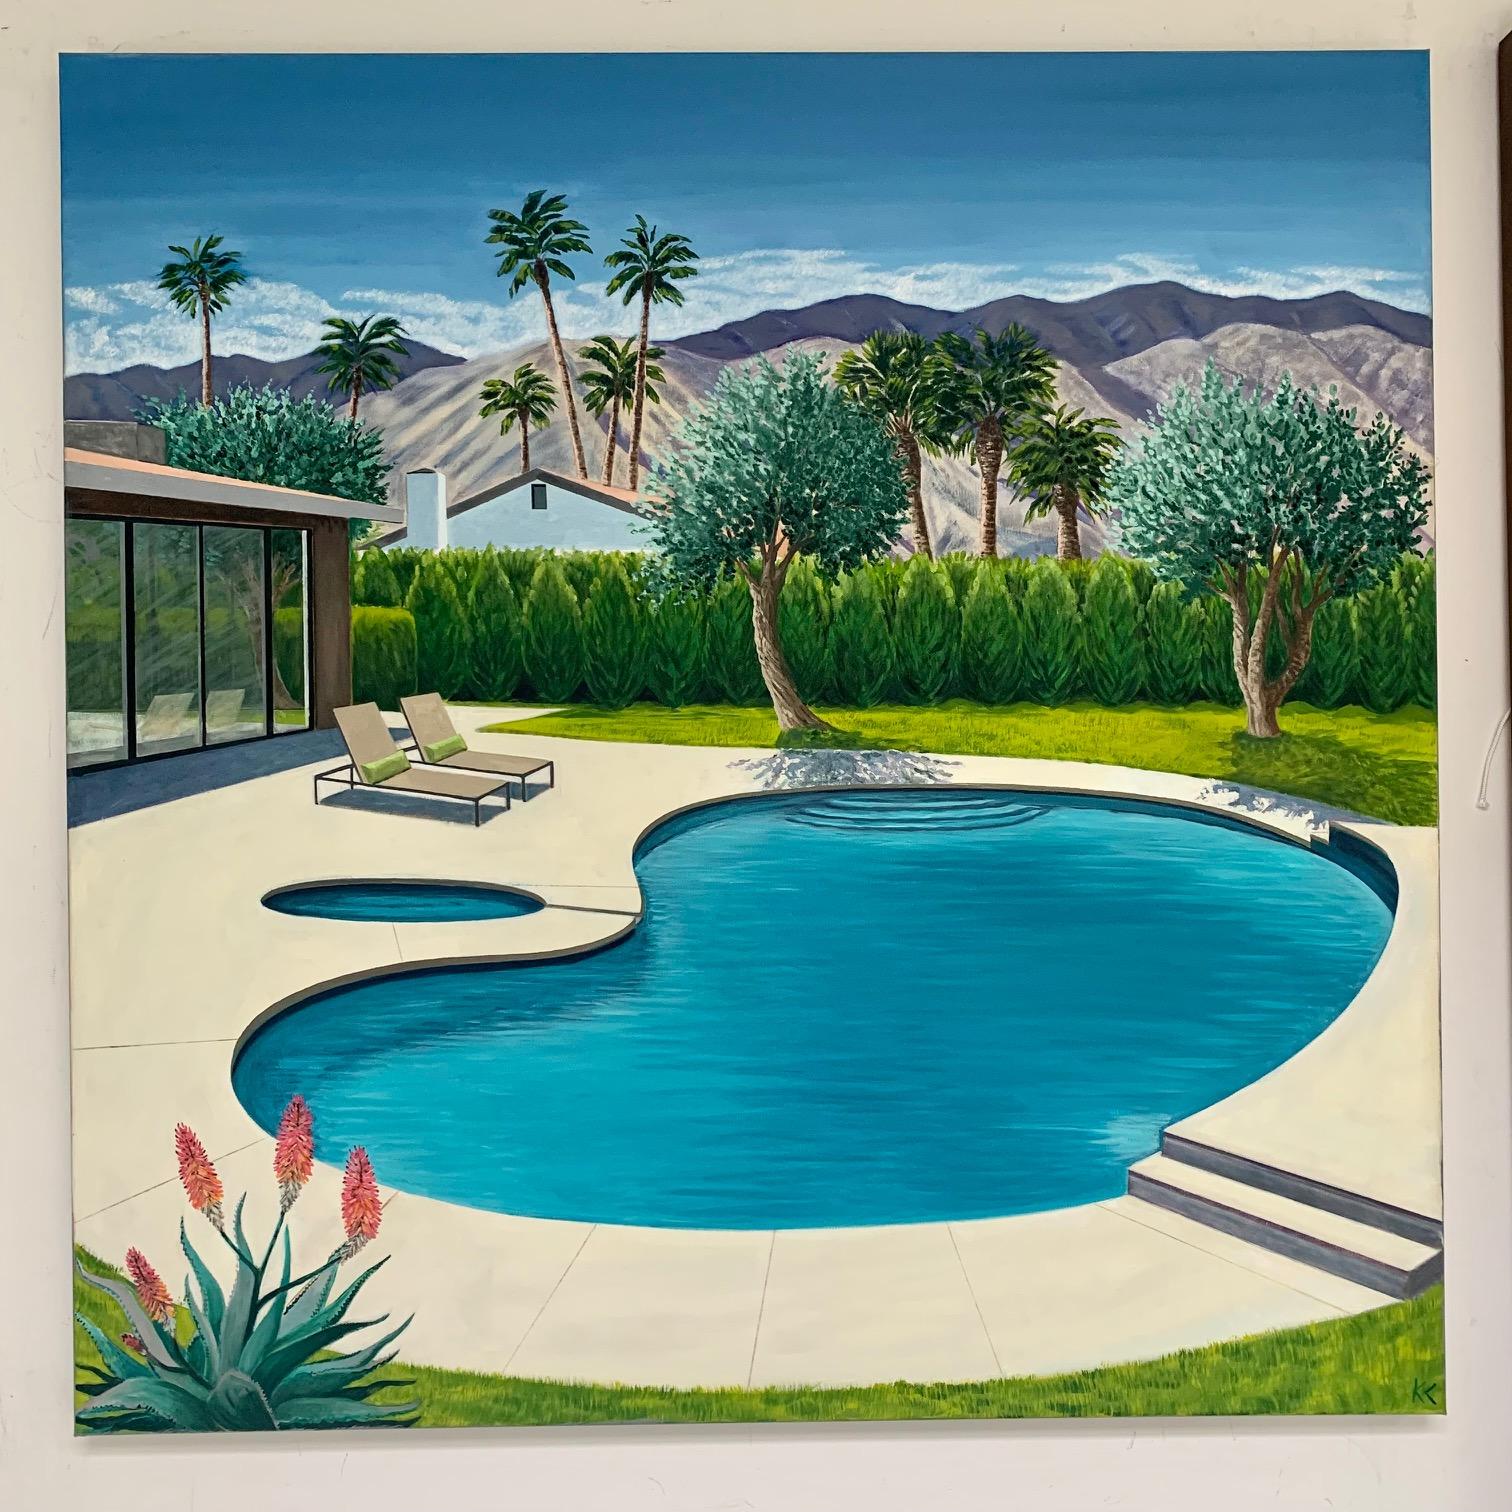 Villa Olivos by Karen Lynn [2021]

This is a painting from my modernist pool series of paintings. In this particular painting I loved the shape of the kidney shaped pool and I placed the olive trees surrounding the architectural modern home in a